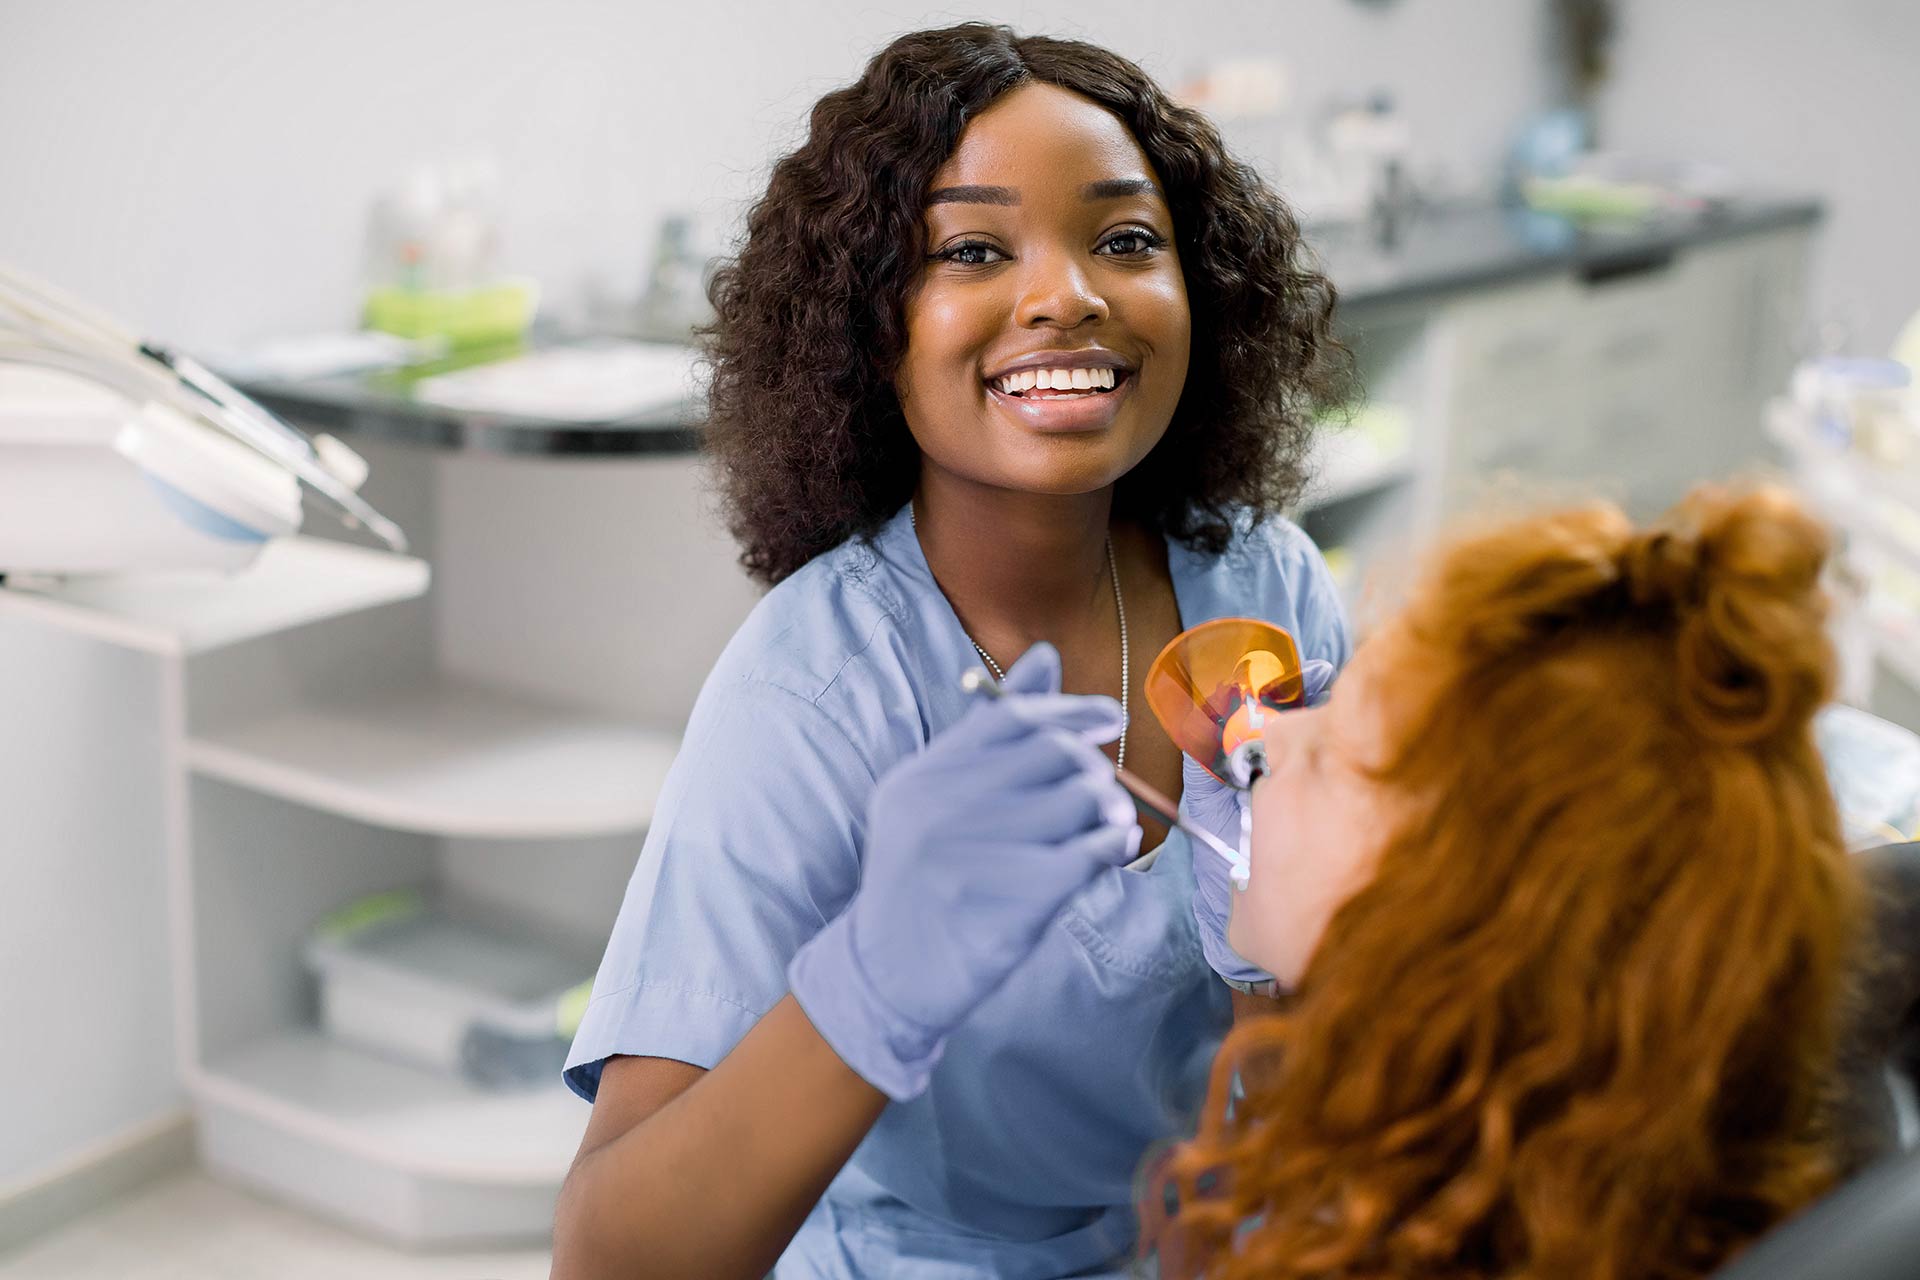 Dental hygienist smiles at camera while working with patient